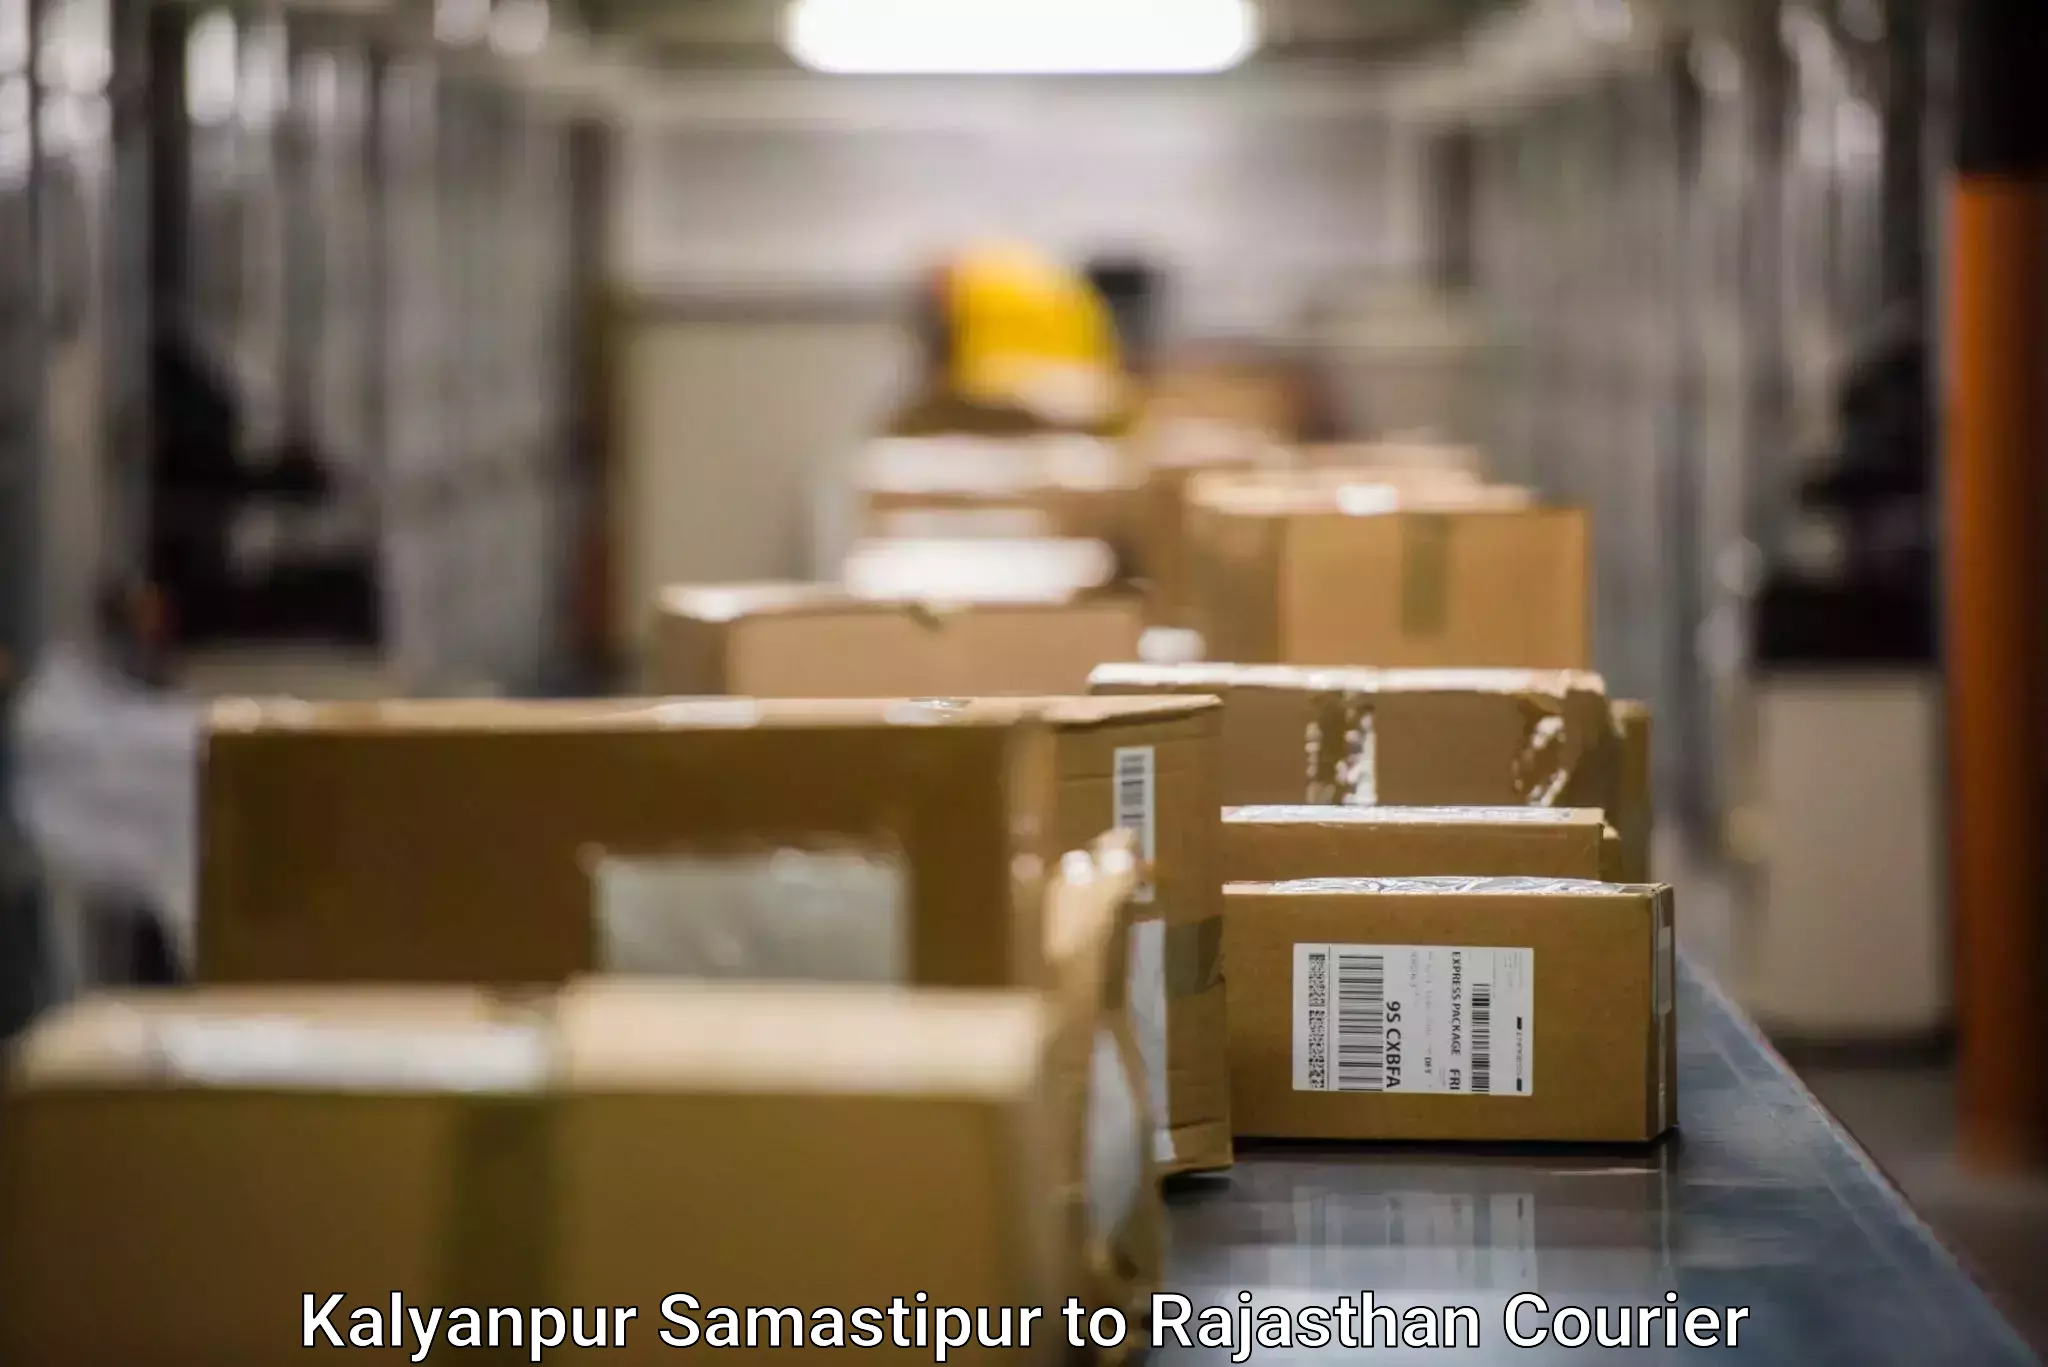 Quality courier services in Kalyanpur Samastipur to Bari Dholpur